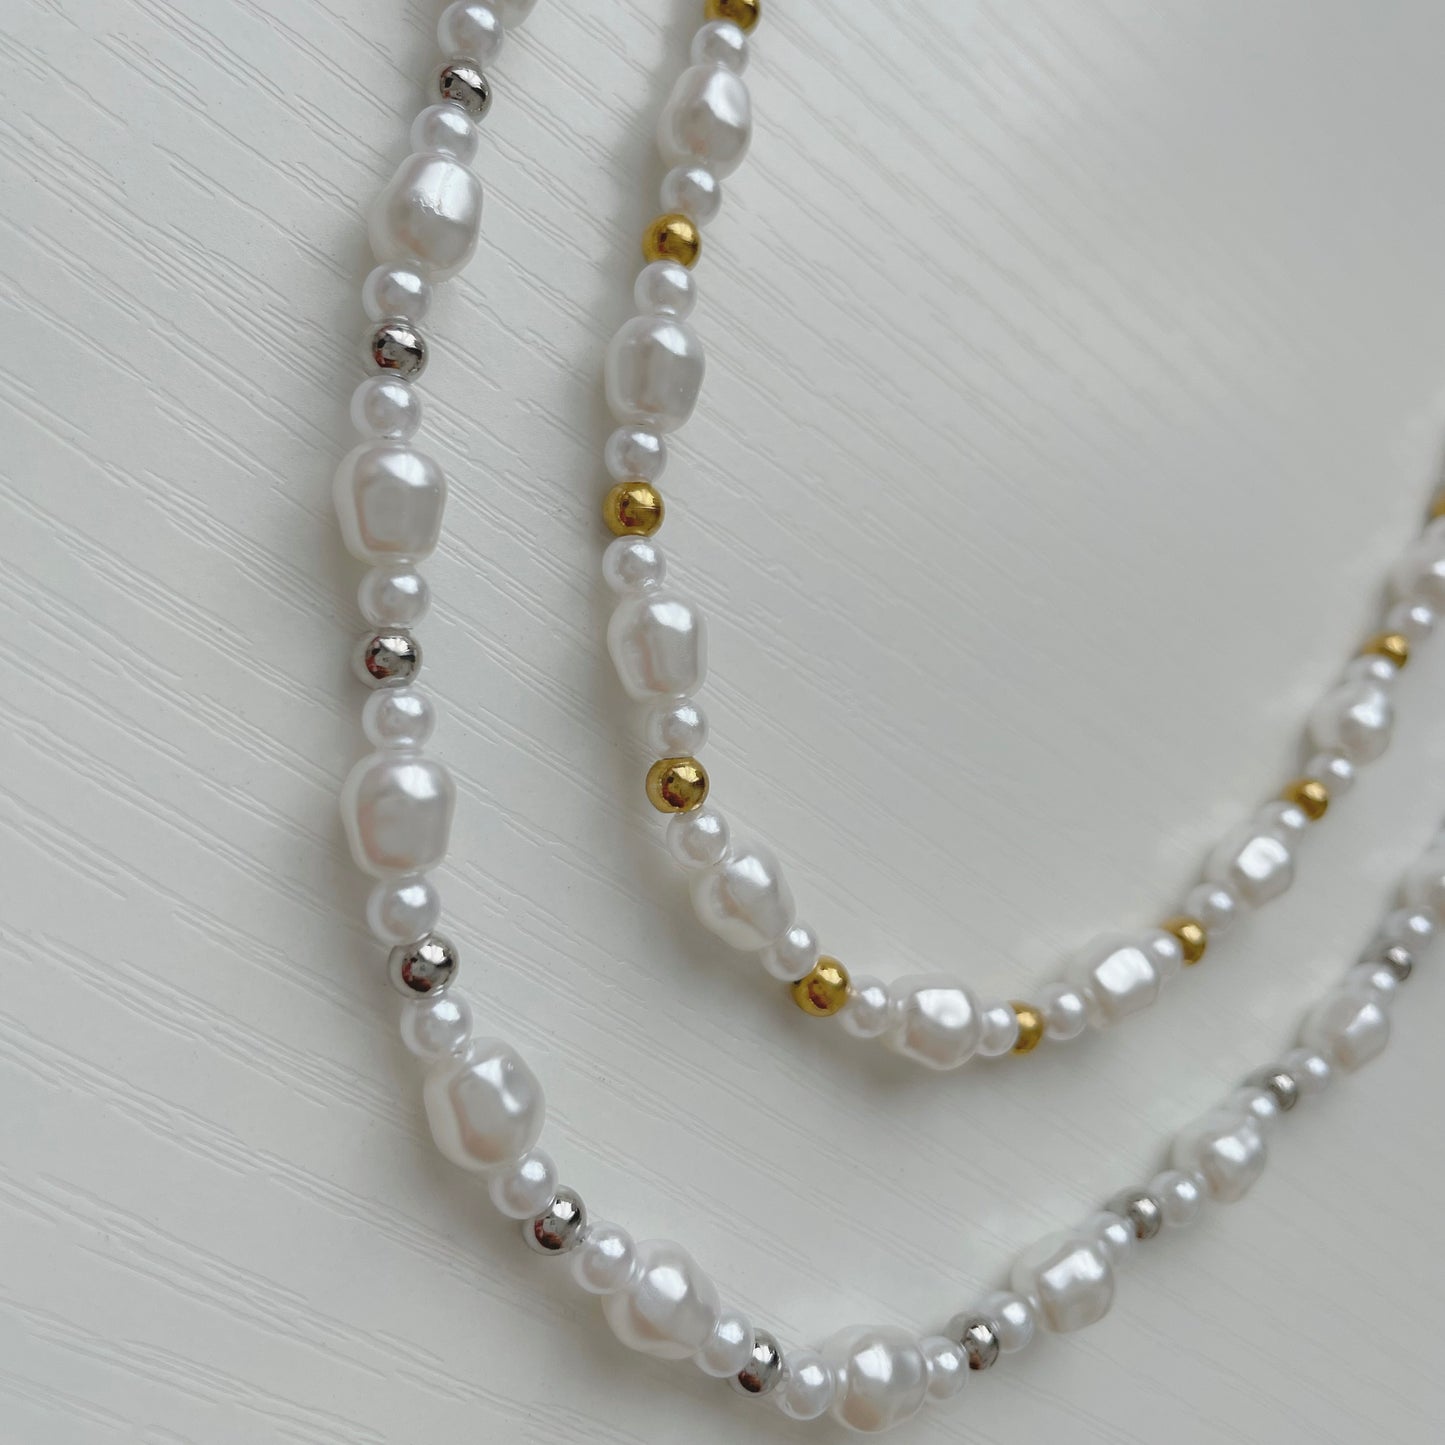 pearl necklace with a mixture of gold and silver beads